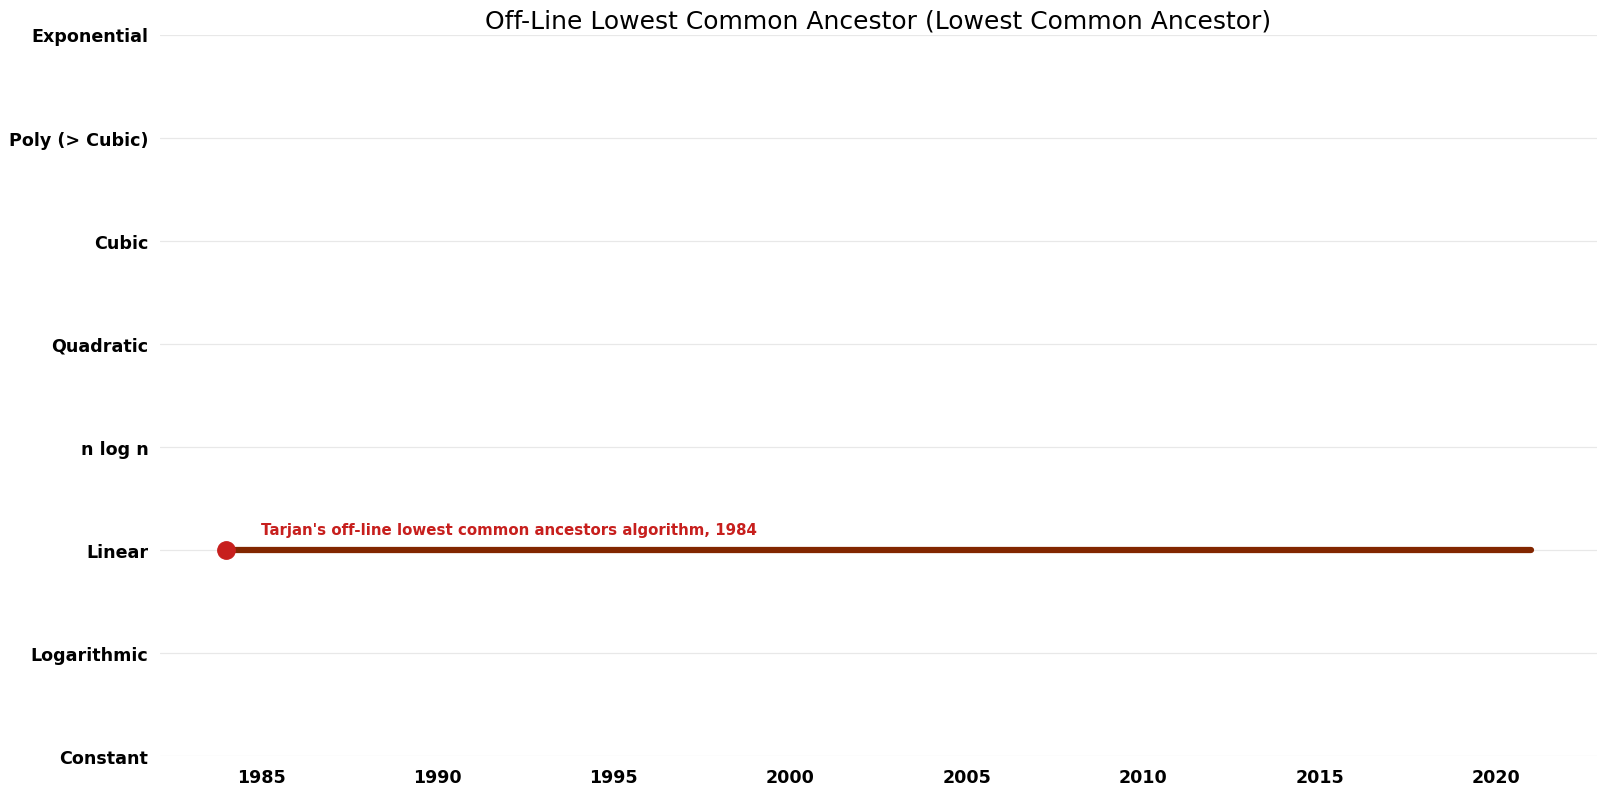 Lowest Common Ancestor - Off-Line Lowest Common Ancestor - Space.png